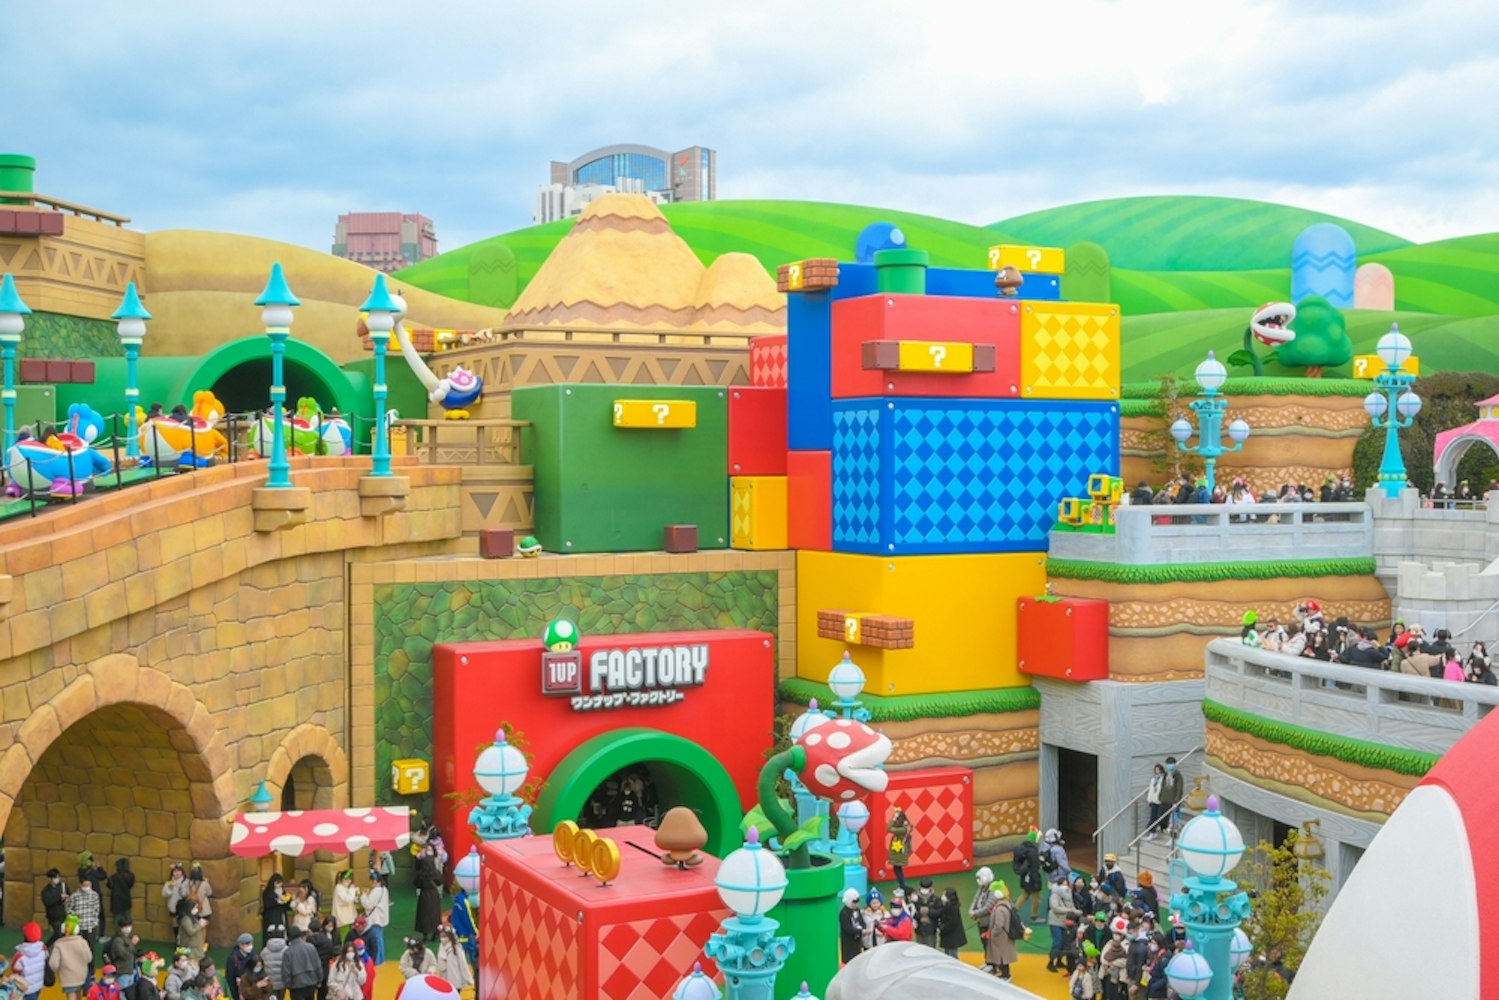 Super Nintendo World is a famous theme park in Osaka